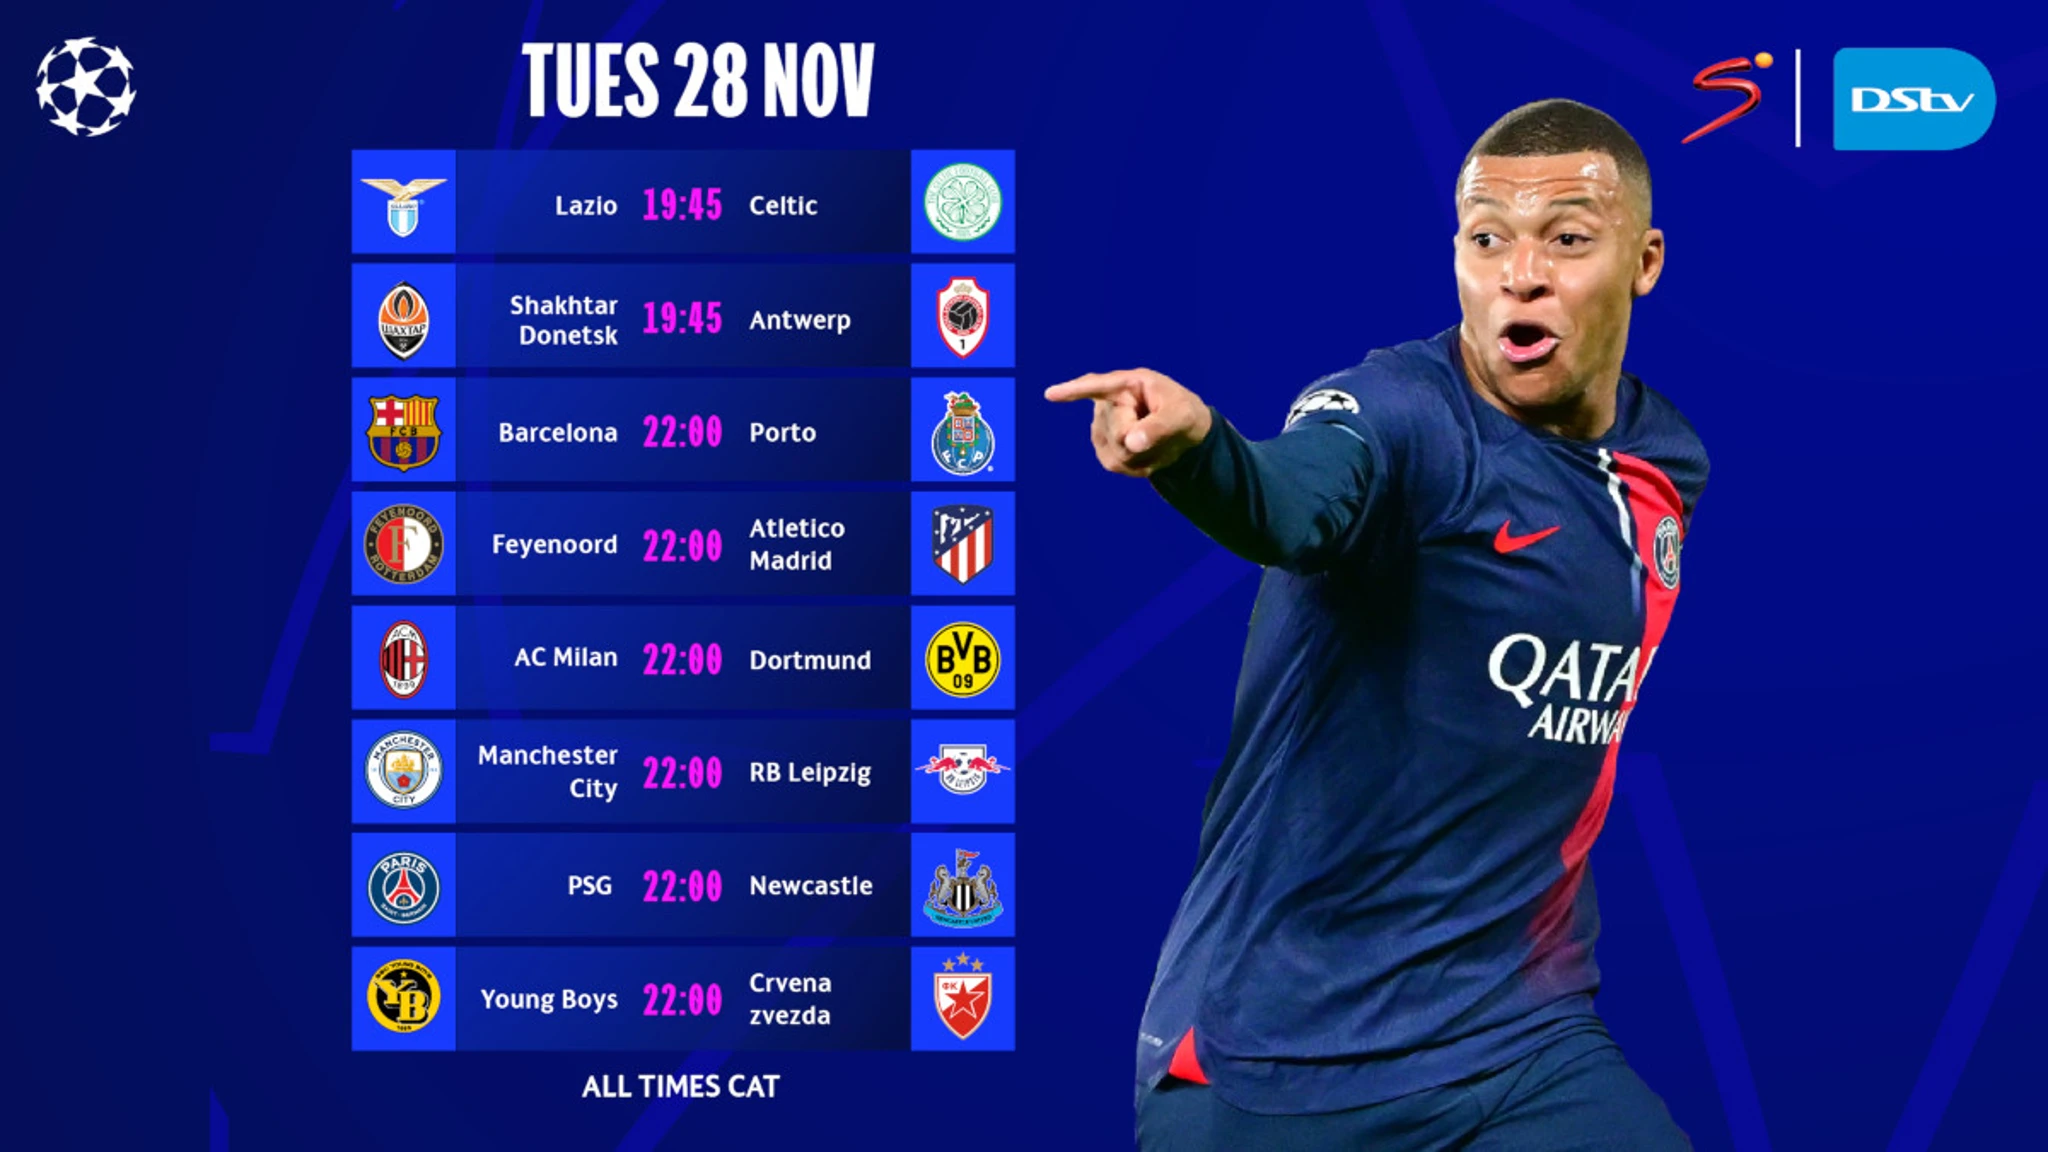 The Champions League is here: A complete preview